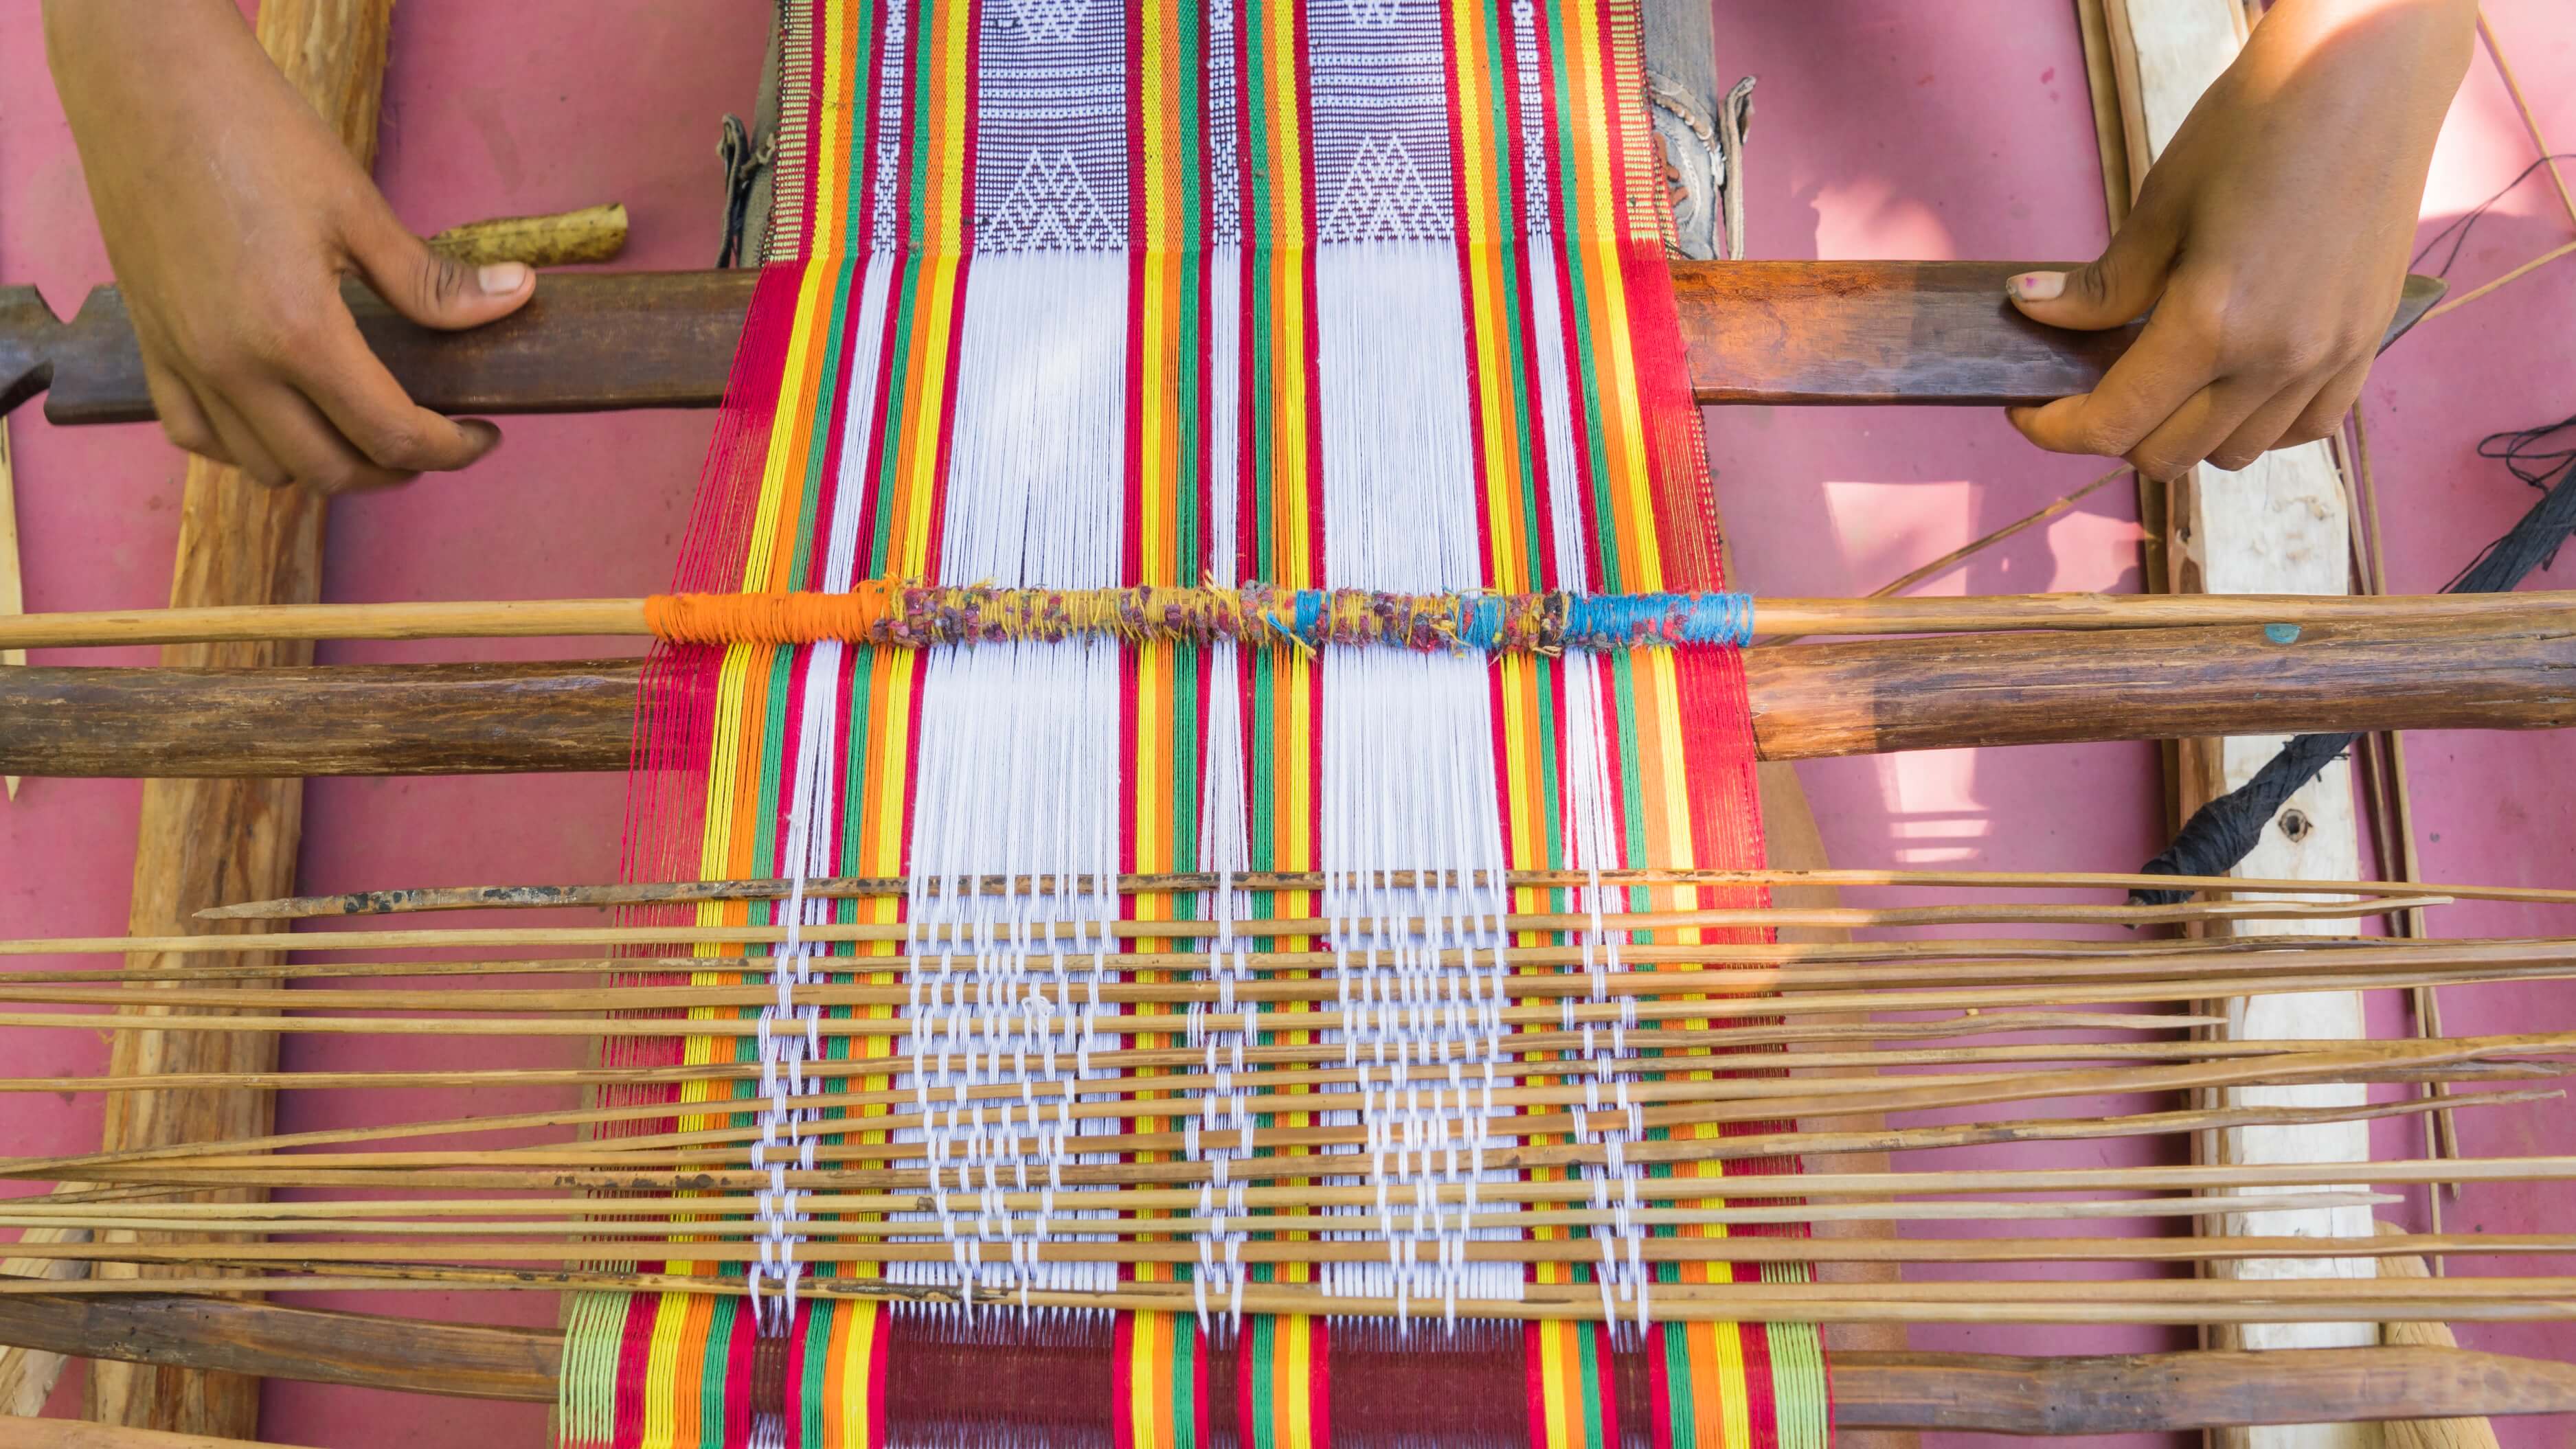 Lotis, a variant of Timorese tenun handweaving techniques. Weaving is another aspect of Timorose culture Lakoat.Kujawas strives to preserve. Photo by Andra Fembriarto